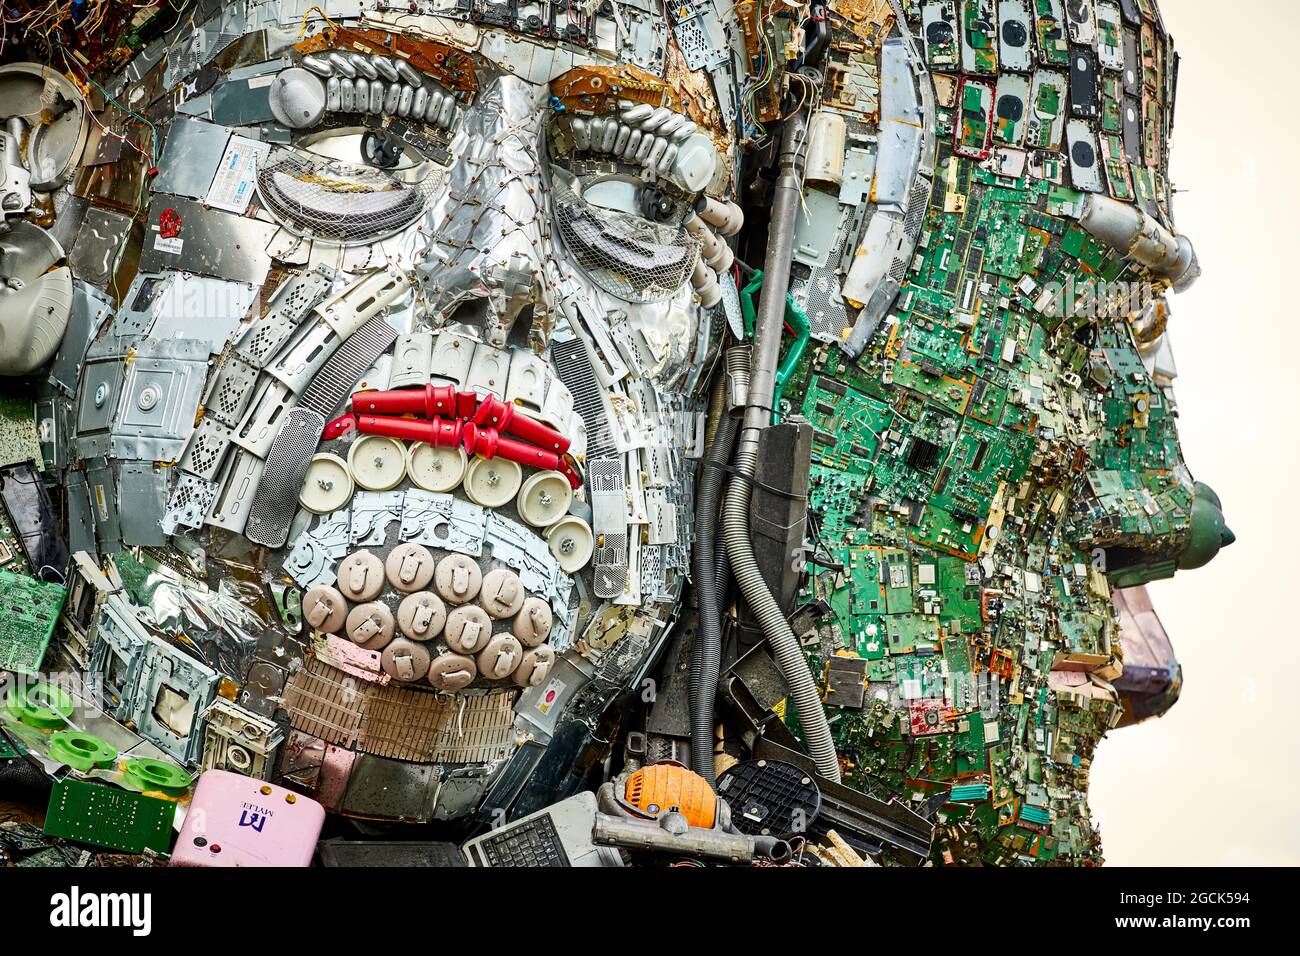 Stockport MusicMagpie giant Mount Rushmore style sculpture G7 leaders heads made entirely of discarded electronics Angela Merkel Joe Biden Stock Photo